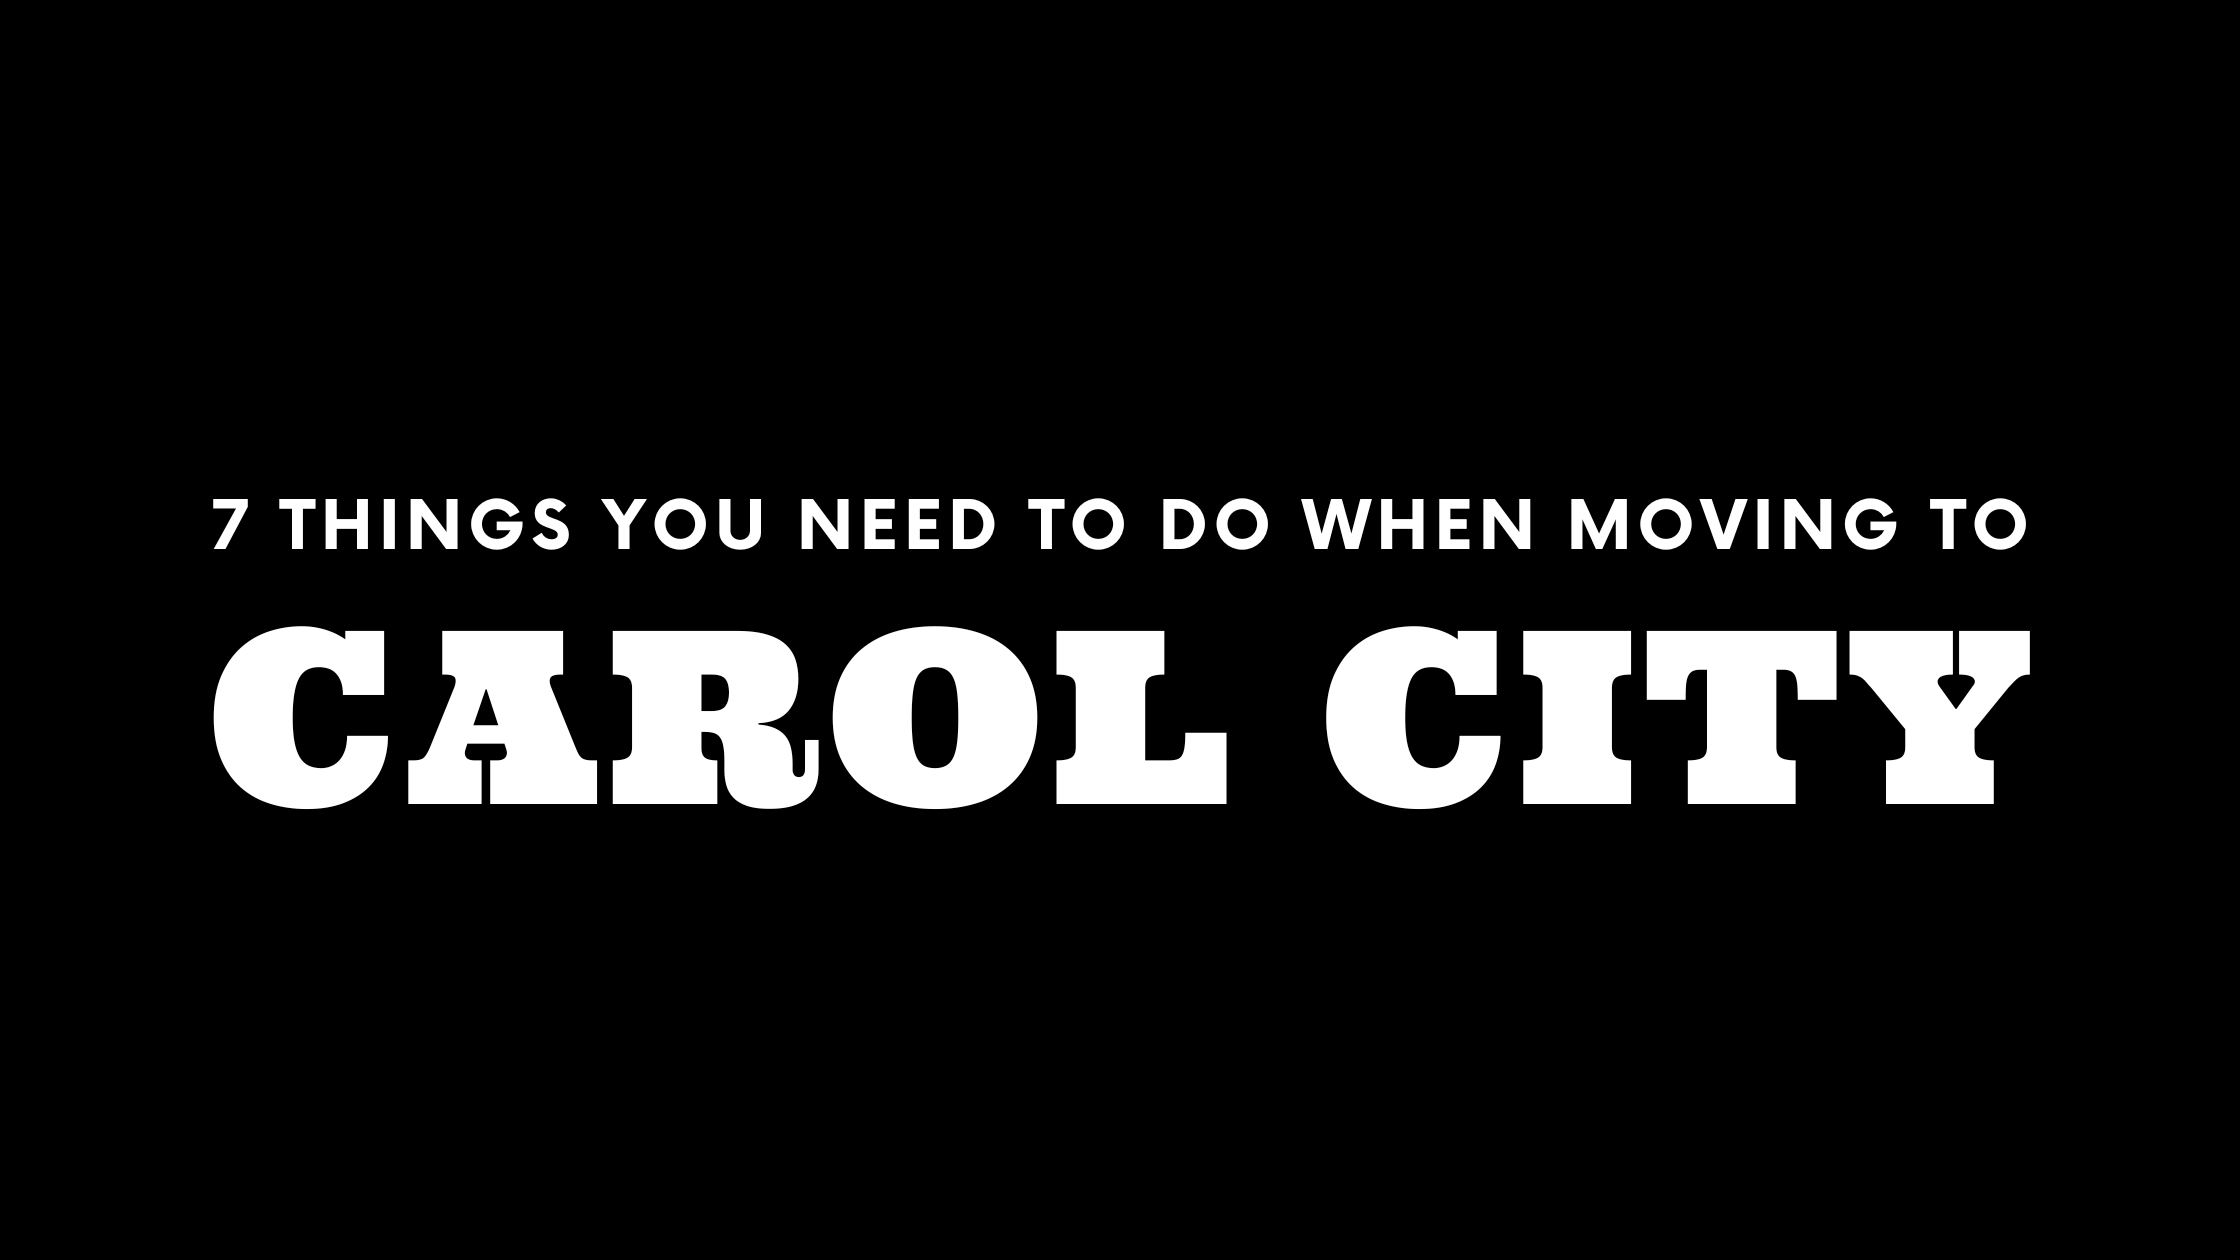 Moving to Carol City? 7 Things You Need To Do Immediately!